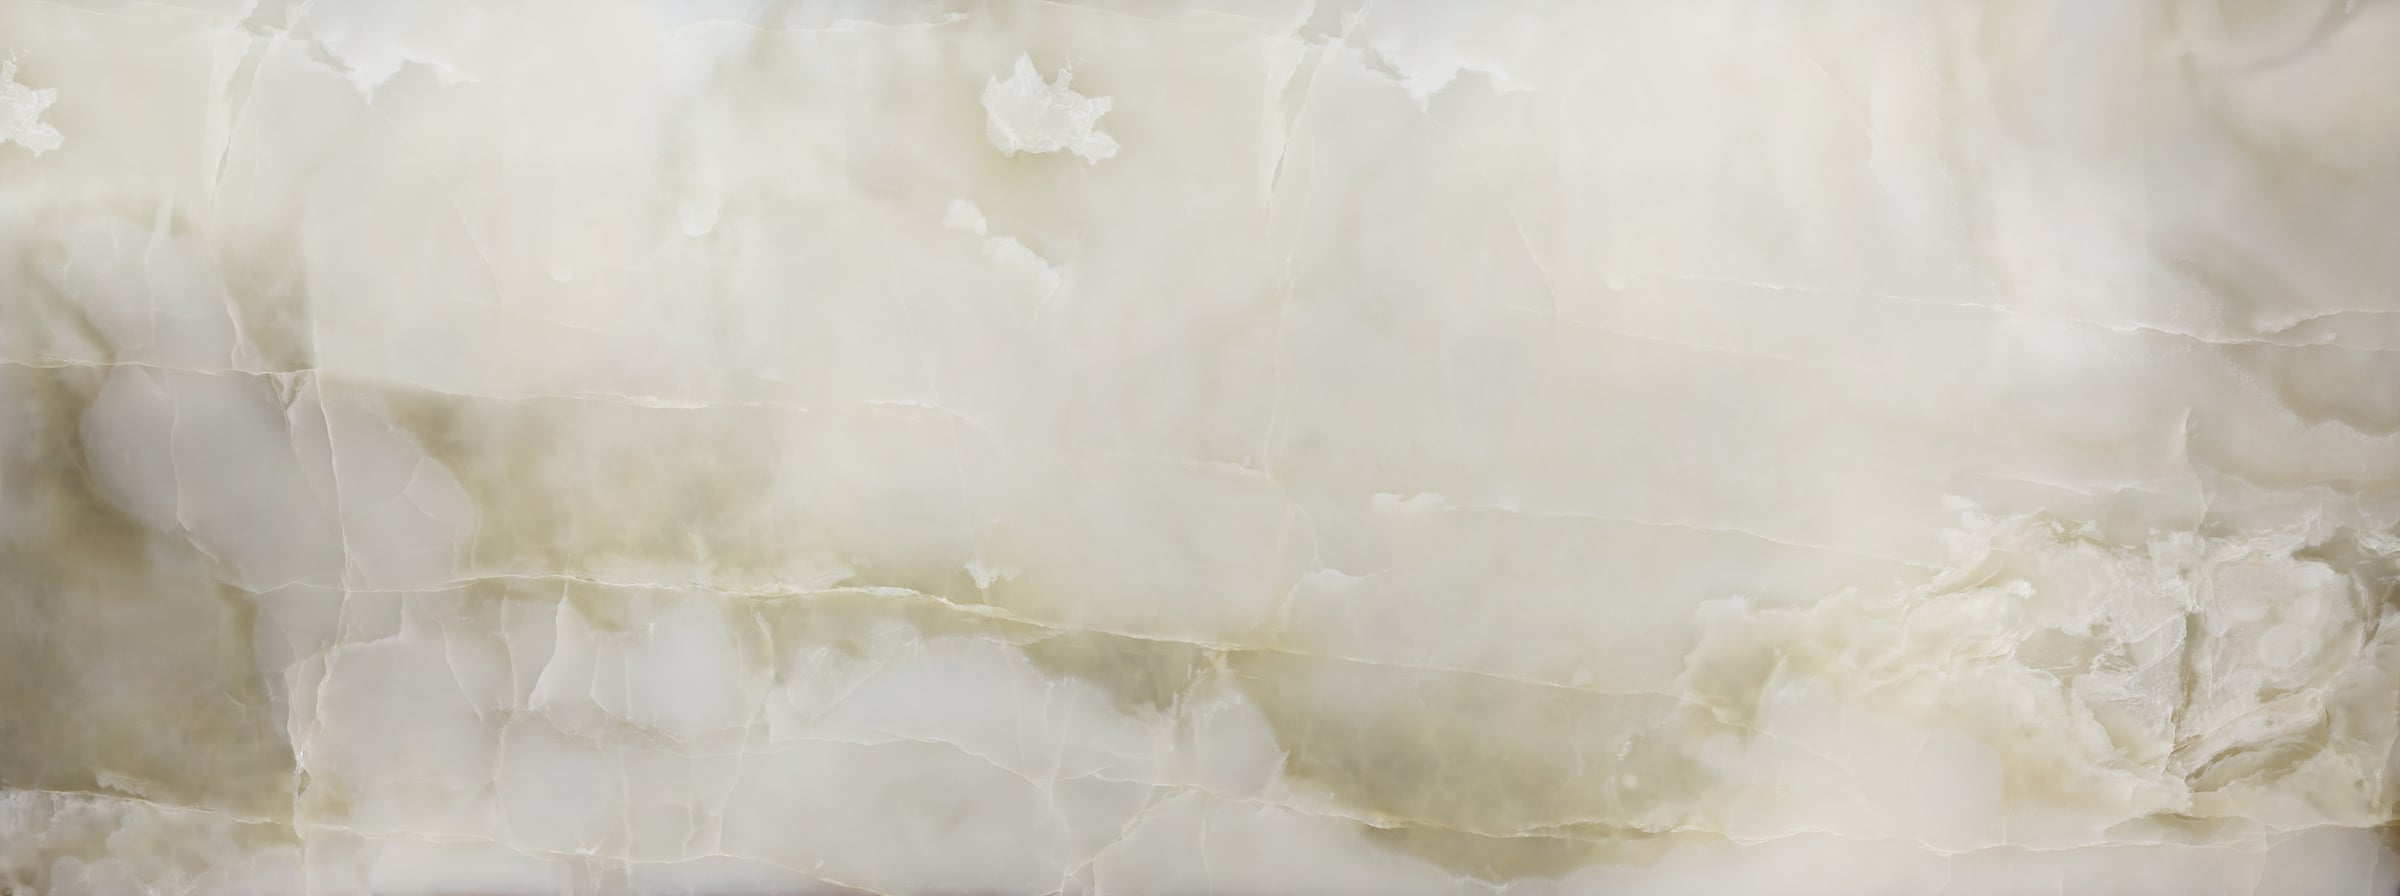 484 megapixels! An ultra-high-resolution texture photo file of white onyx stone; gigapixel photograph created by David Lineton.